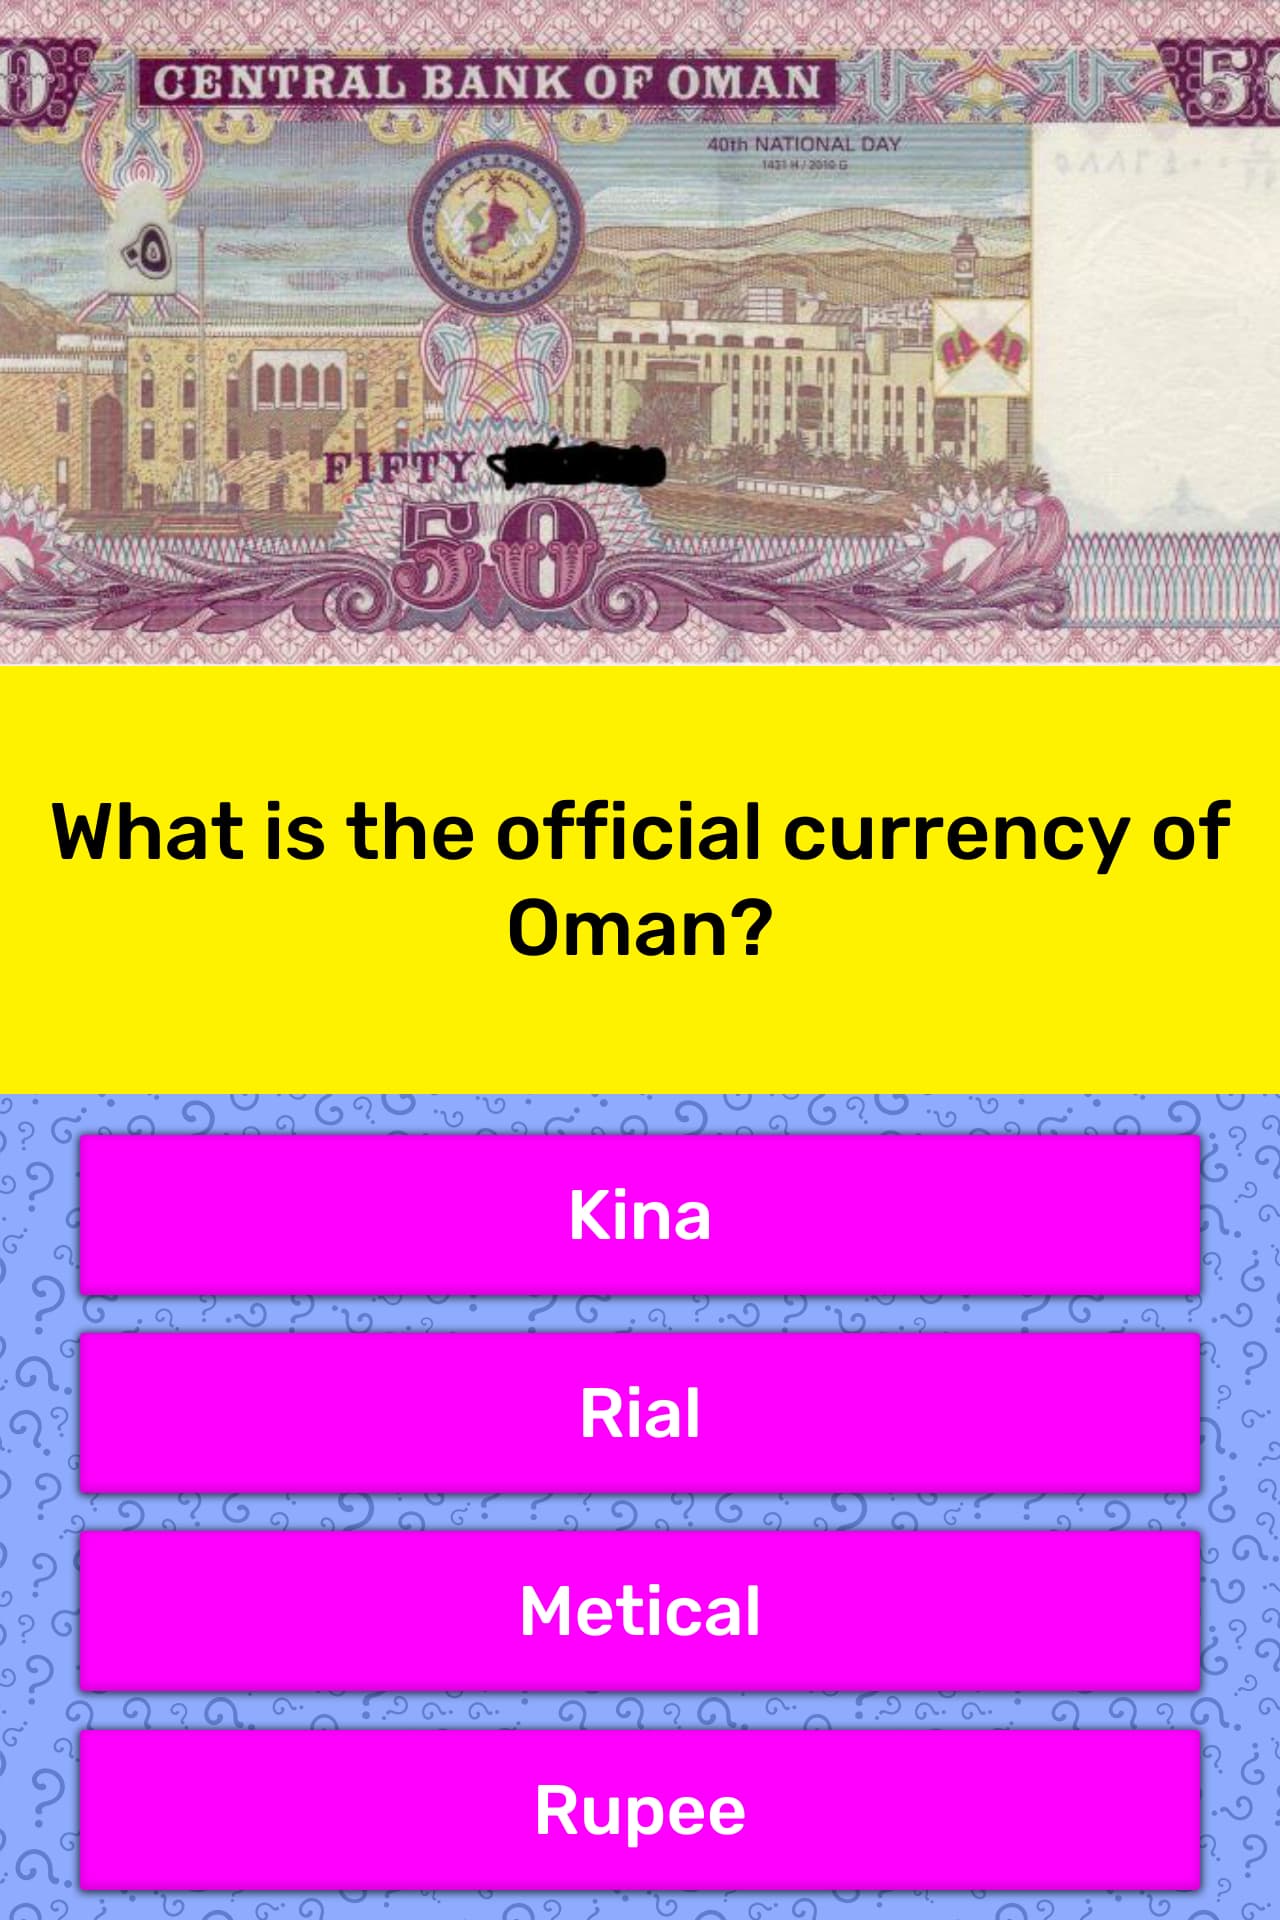 value of oman currency compare to the us